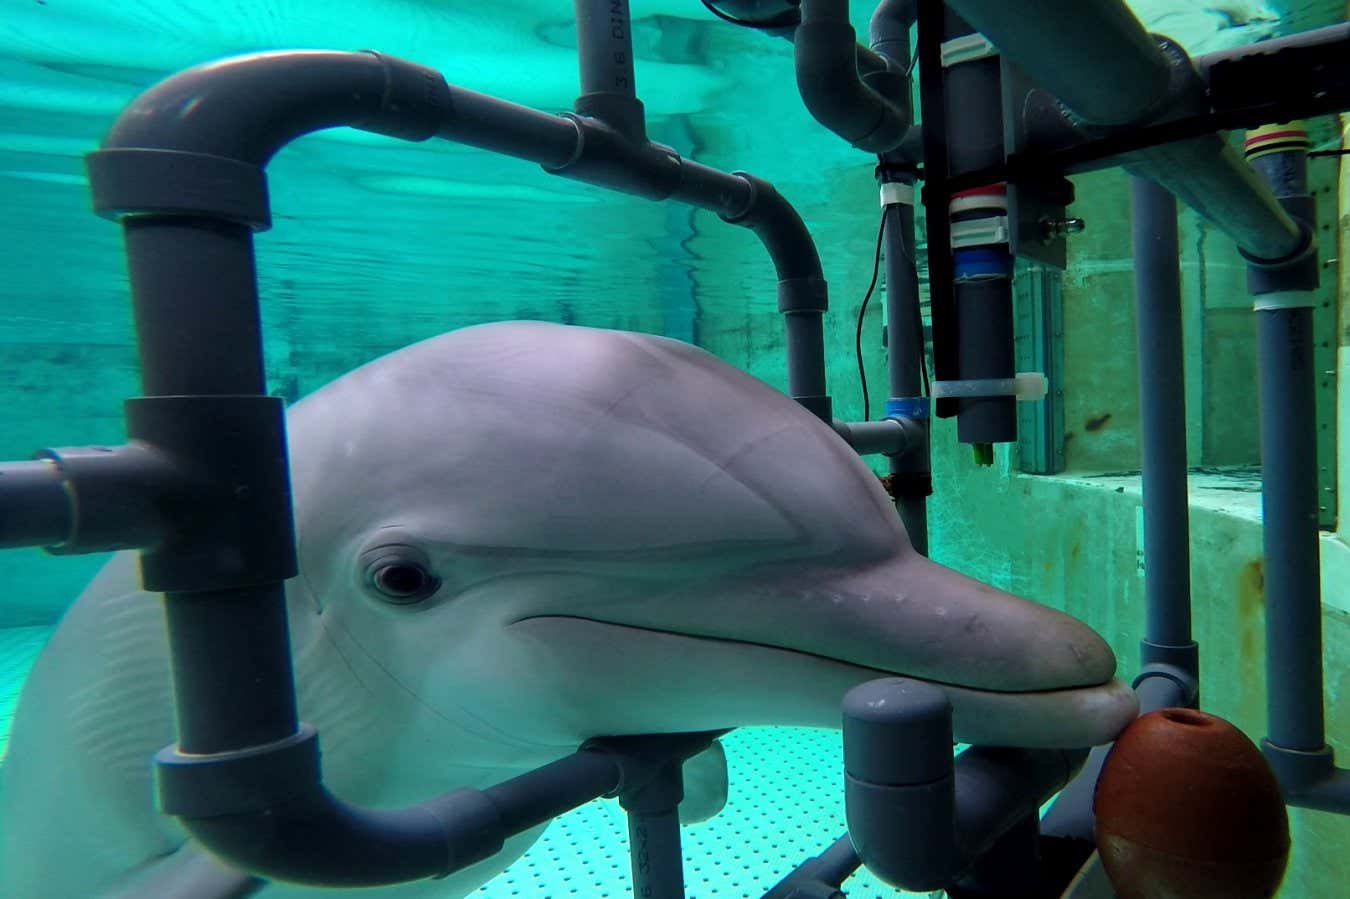 Bottlenose dolphins can sense electric fields with their snouts